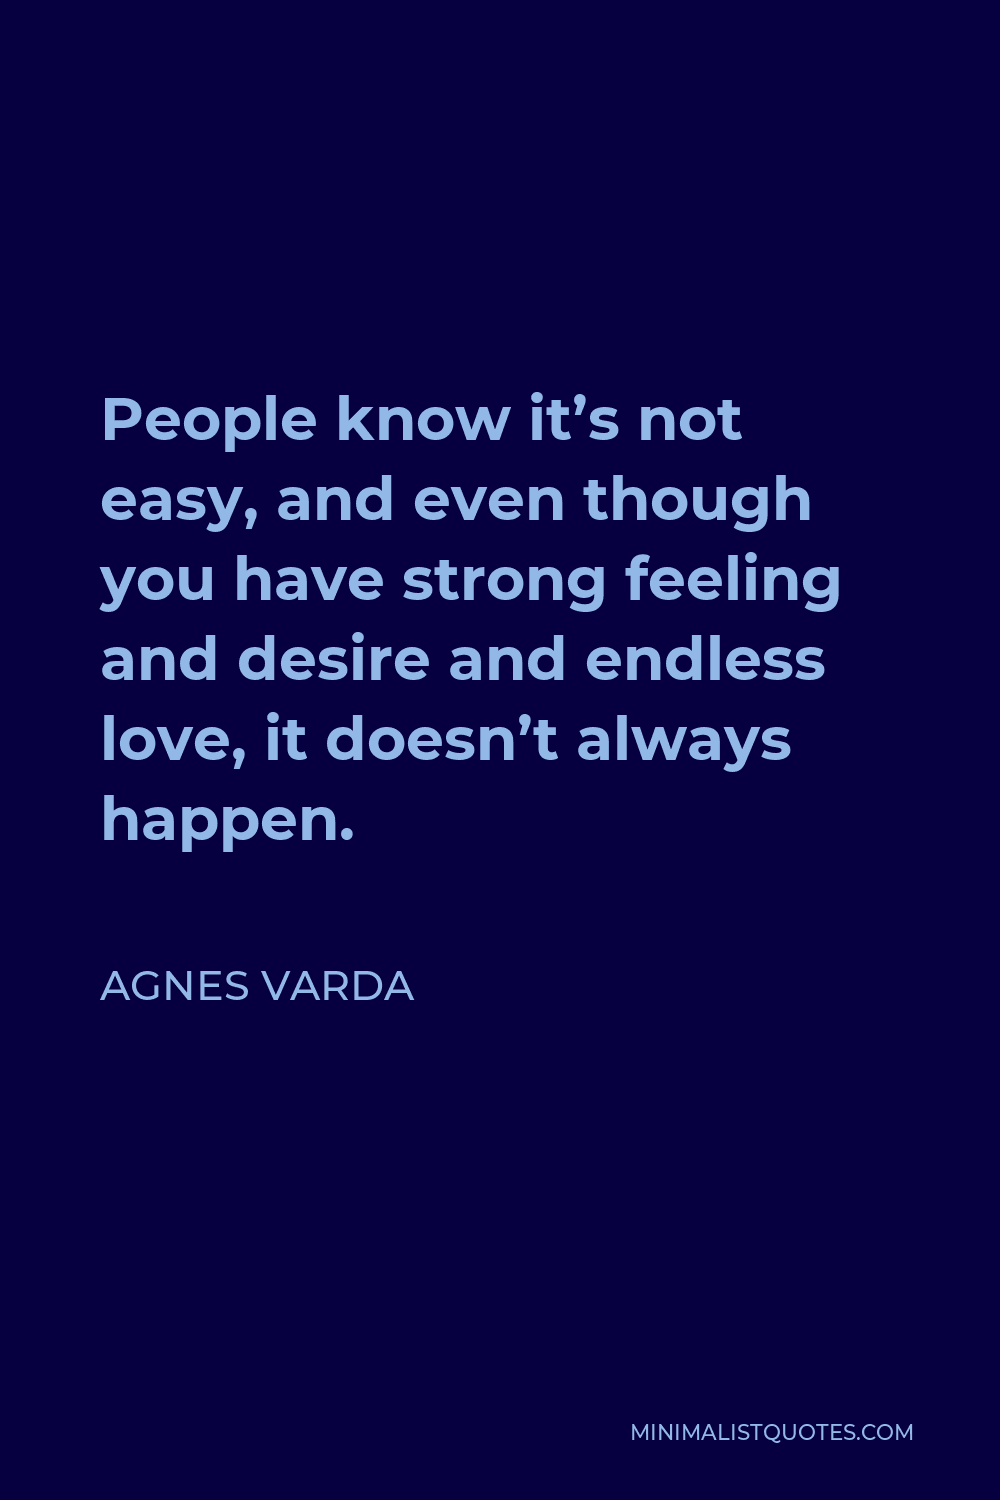 Agnes Varda Quote - People know it’s not easy, and even though you have strong feeling and desire and endless love, it doesn’t always happen.